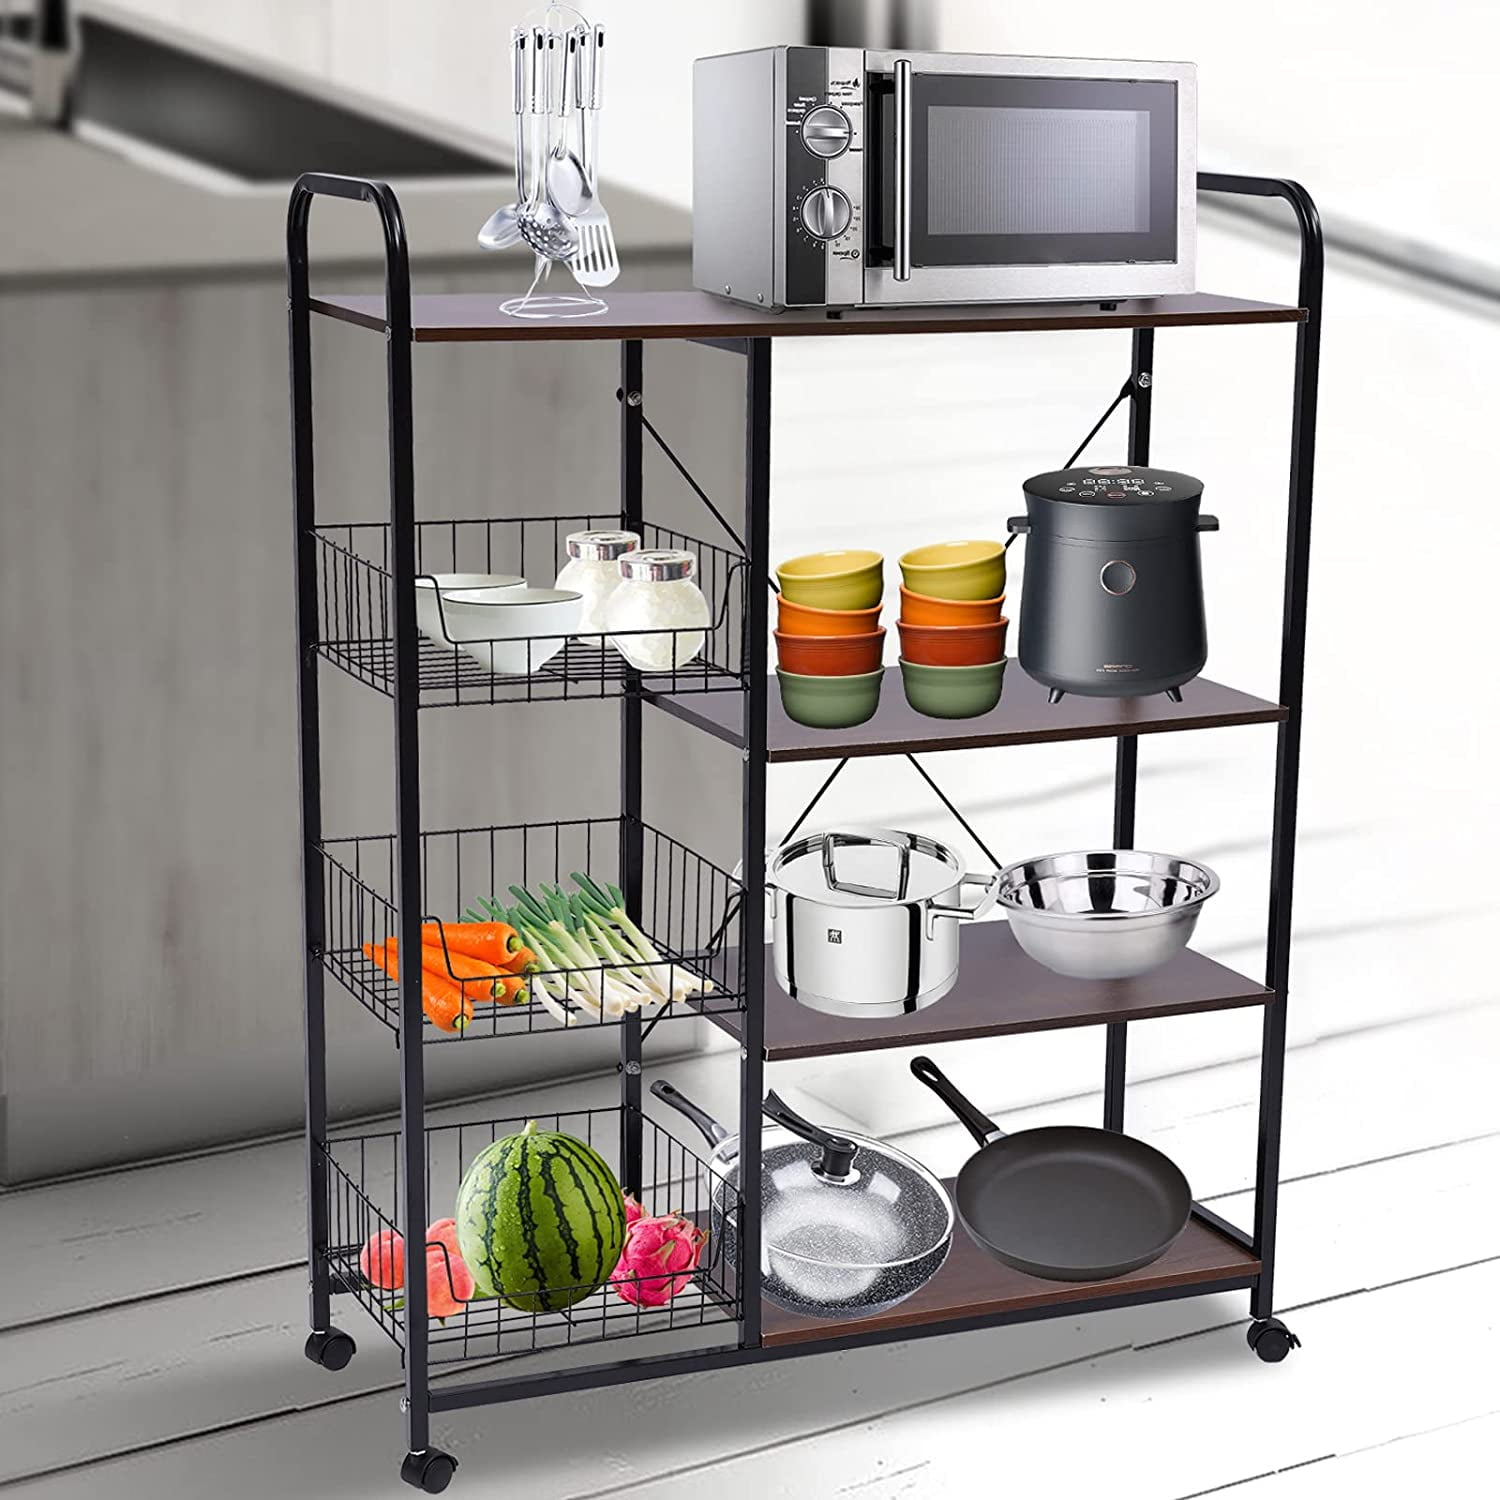 MONVANE Kitchen Baker's Rack Storage Shelf Microwave Cart Oven Stand Coffee  Bar with Side Hooks 4 Tier Shelves(Rustic Brown)